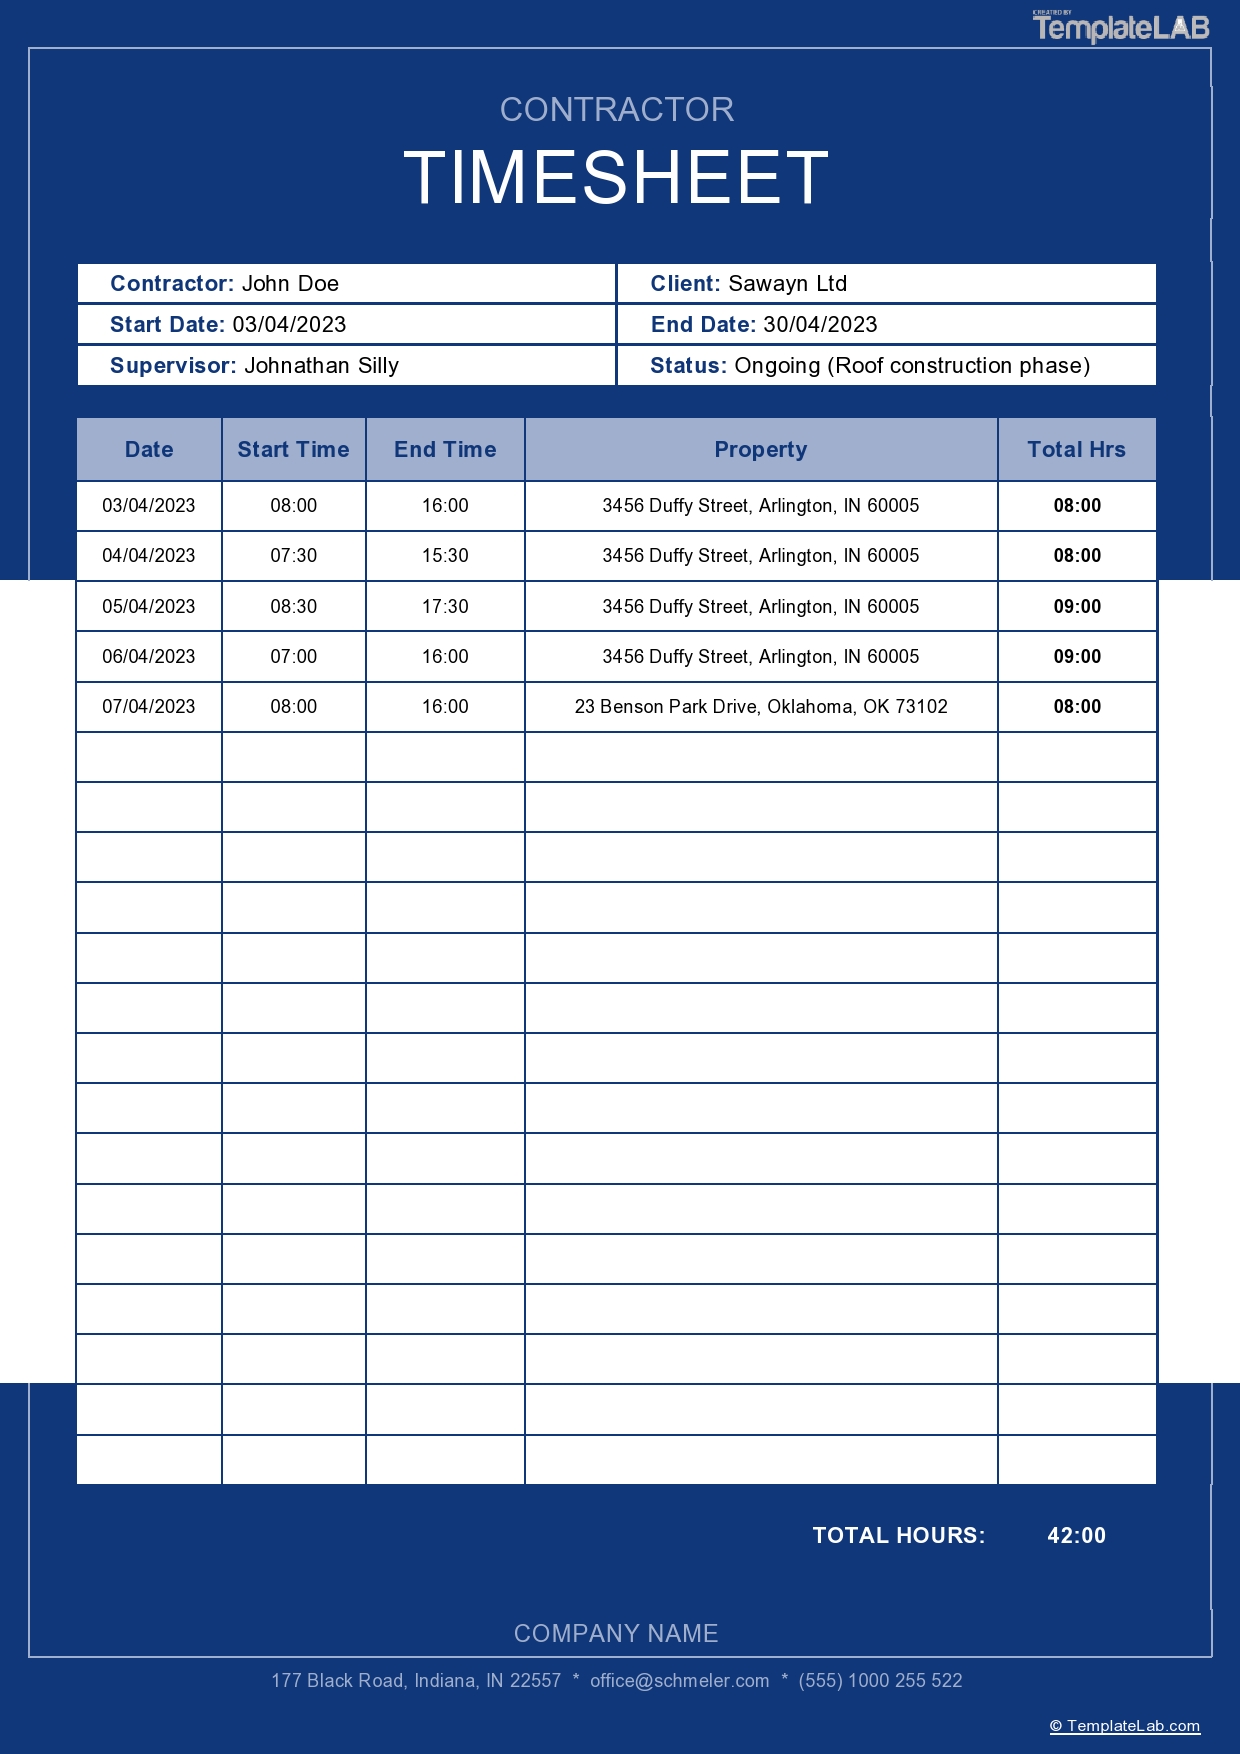 Free Contractor Timesheet Template